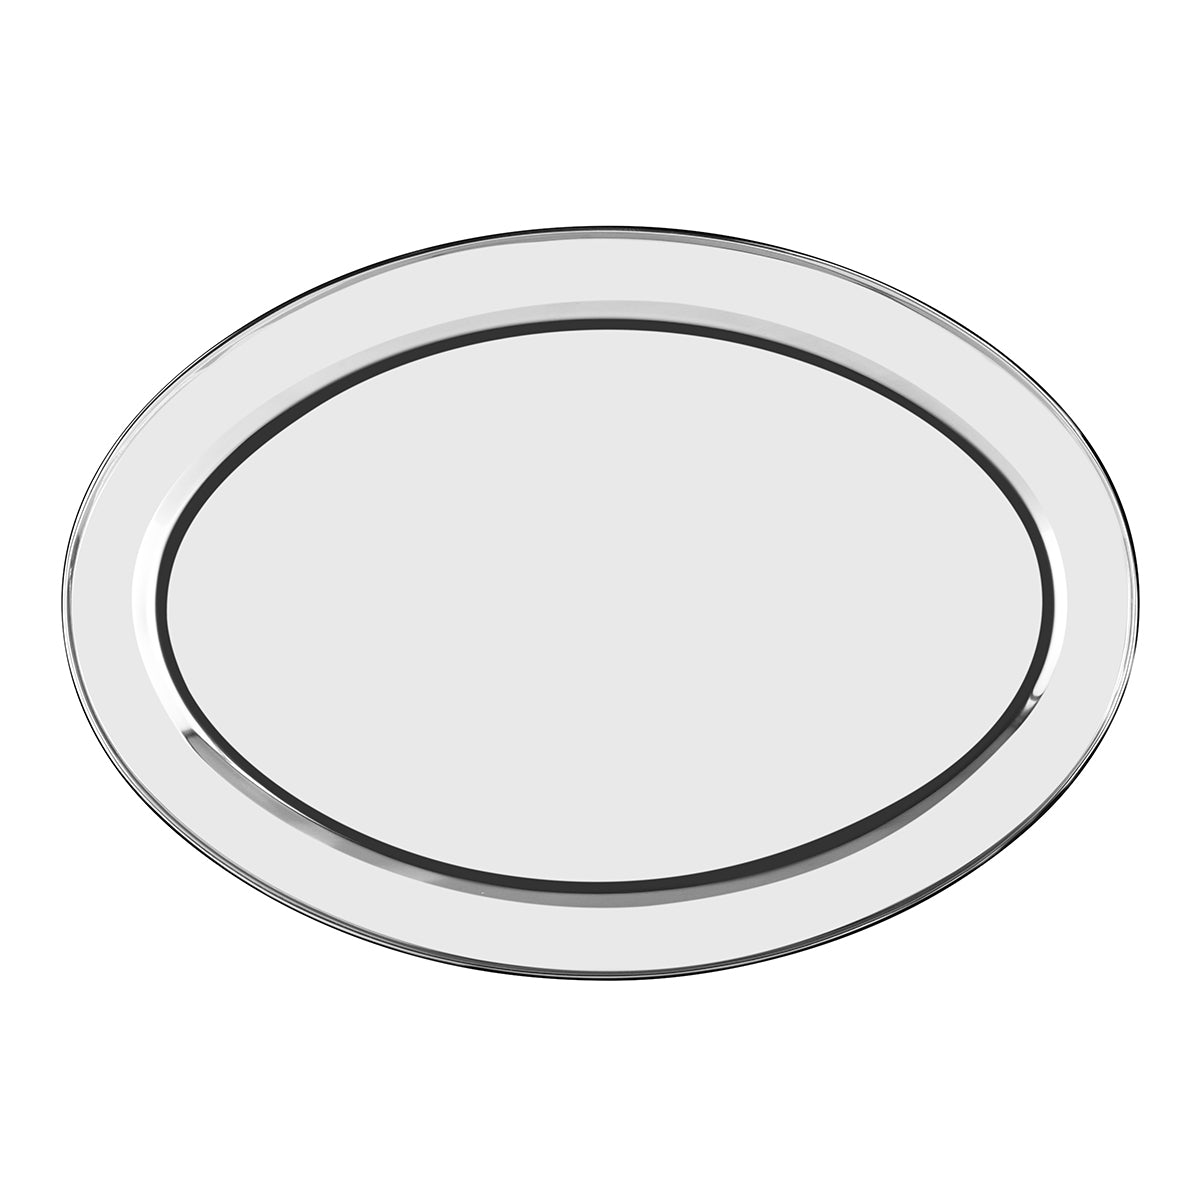 70726 Chef Inox Oval Platter Rolled Edge Stainless Steel 650x530mm Tomkin Australia Hospitality Supplies